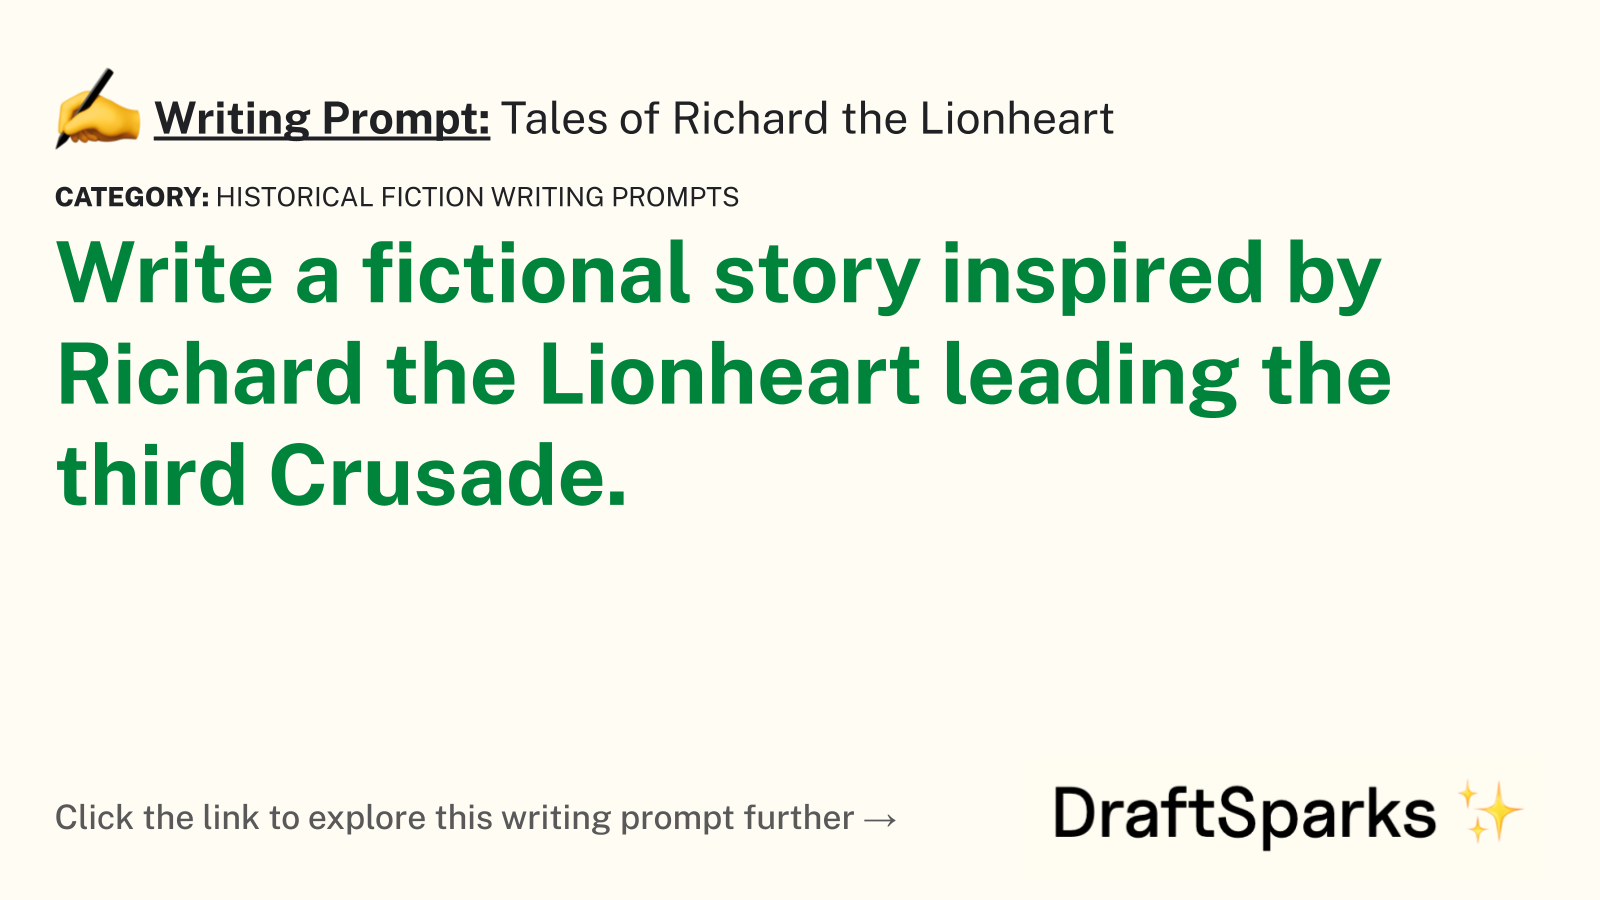 Tales of Richard the Lionheart